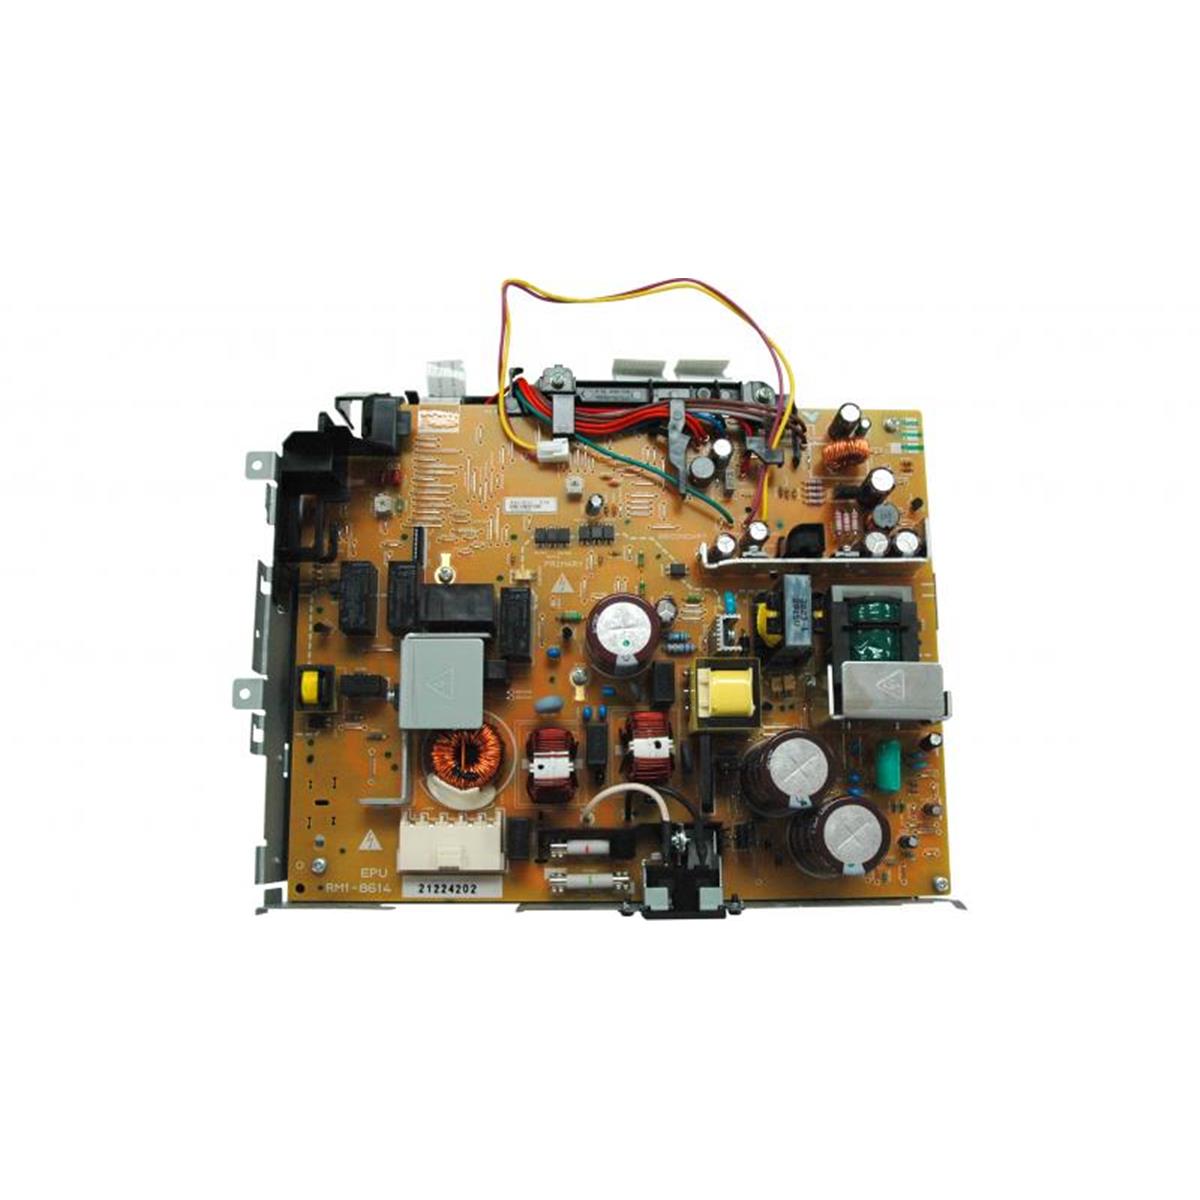 Rm1-8514-oem 500 Sheet Low Voltage Power Supply For M525